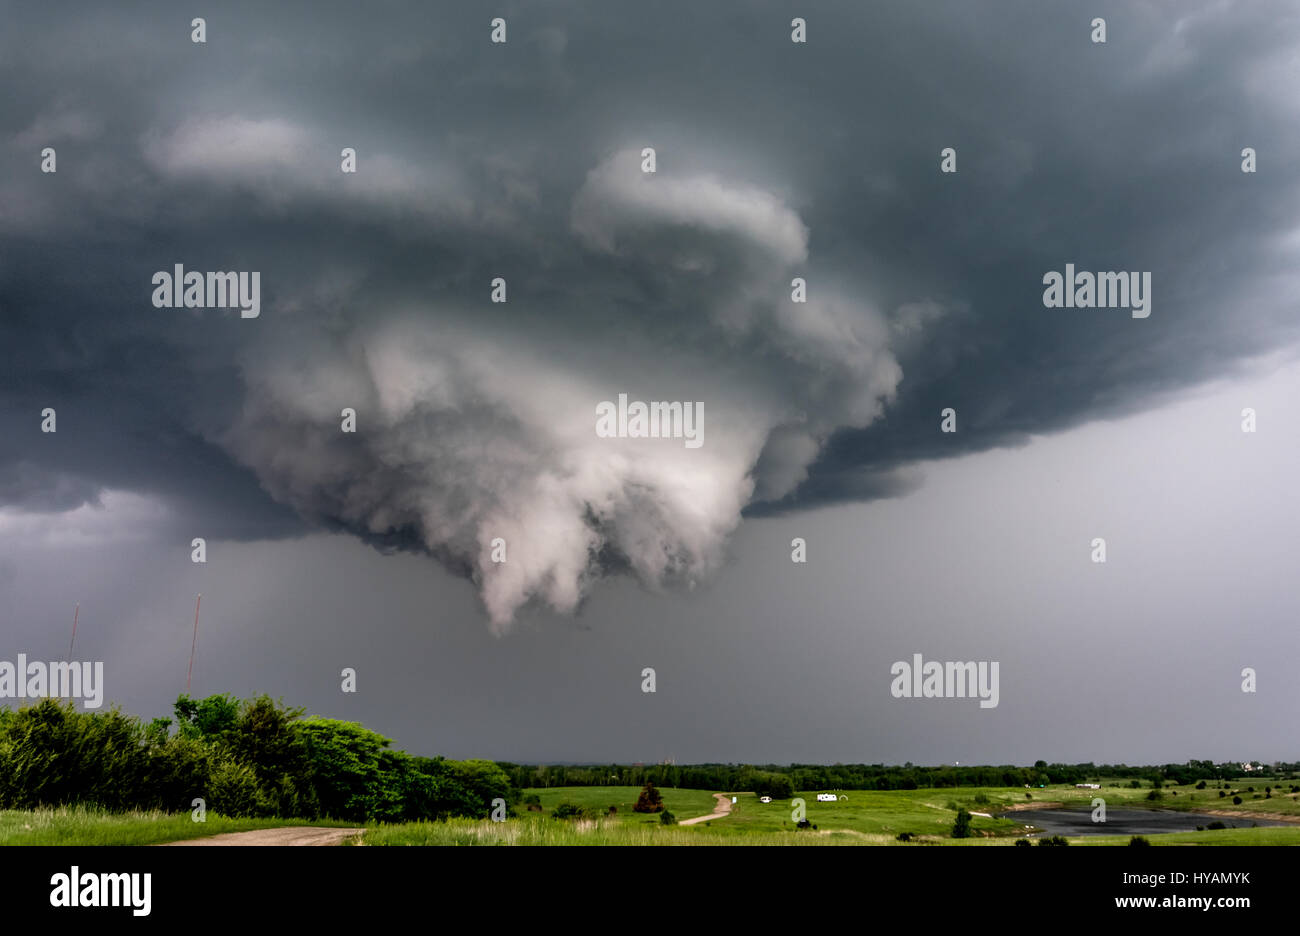 OKLAHOMA, USA: MEET THE female elementary teacher who was inspired by Hollywood film “Twister” and now risks her life to bring you these extraordinary photos of supercell thunderstorms and tornados. Pictures show how the 31-year-old Valentina Abinanti from Galliate, Italy battles winds of over 100-miles-per-hour, over her decade long stormchasing career, which has seen her encounter 70 tornados and four hundred storms. On May 31st 2013, Valentina even survived one deadly tornado, El Reno, the widest in recorded history, which killed three fellow stormchasers and is remembered by the community  Stock Photo